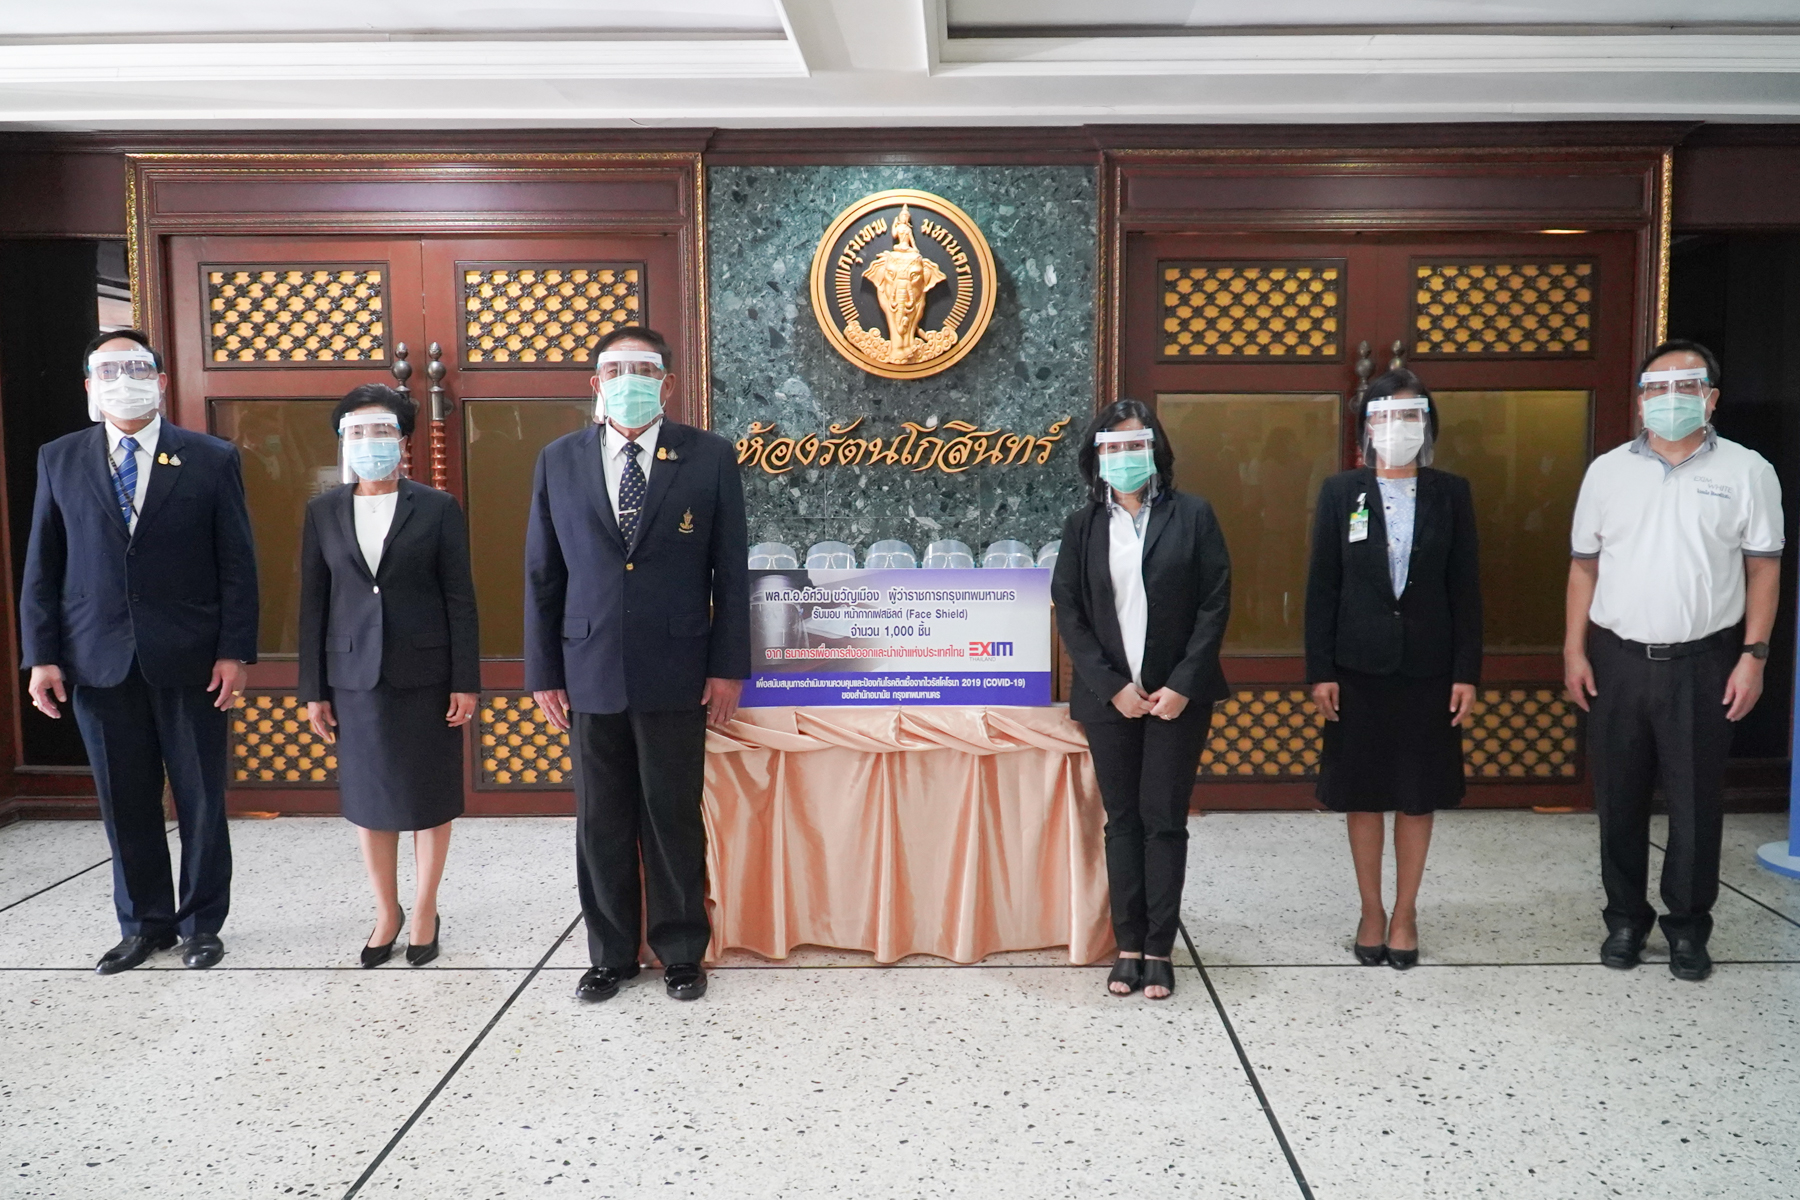 EXIM Thailand Donates Protective Face Shields to Help Protect BMA Staff and Workers from COVID-19